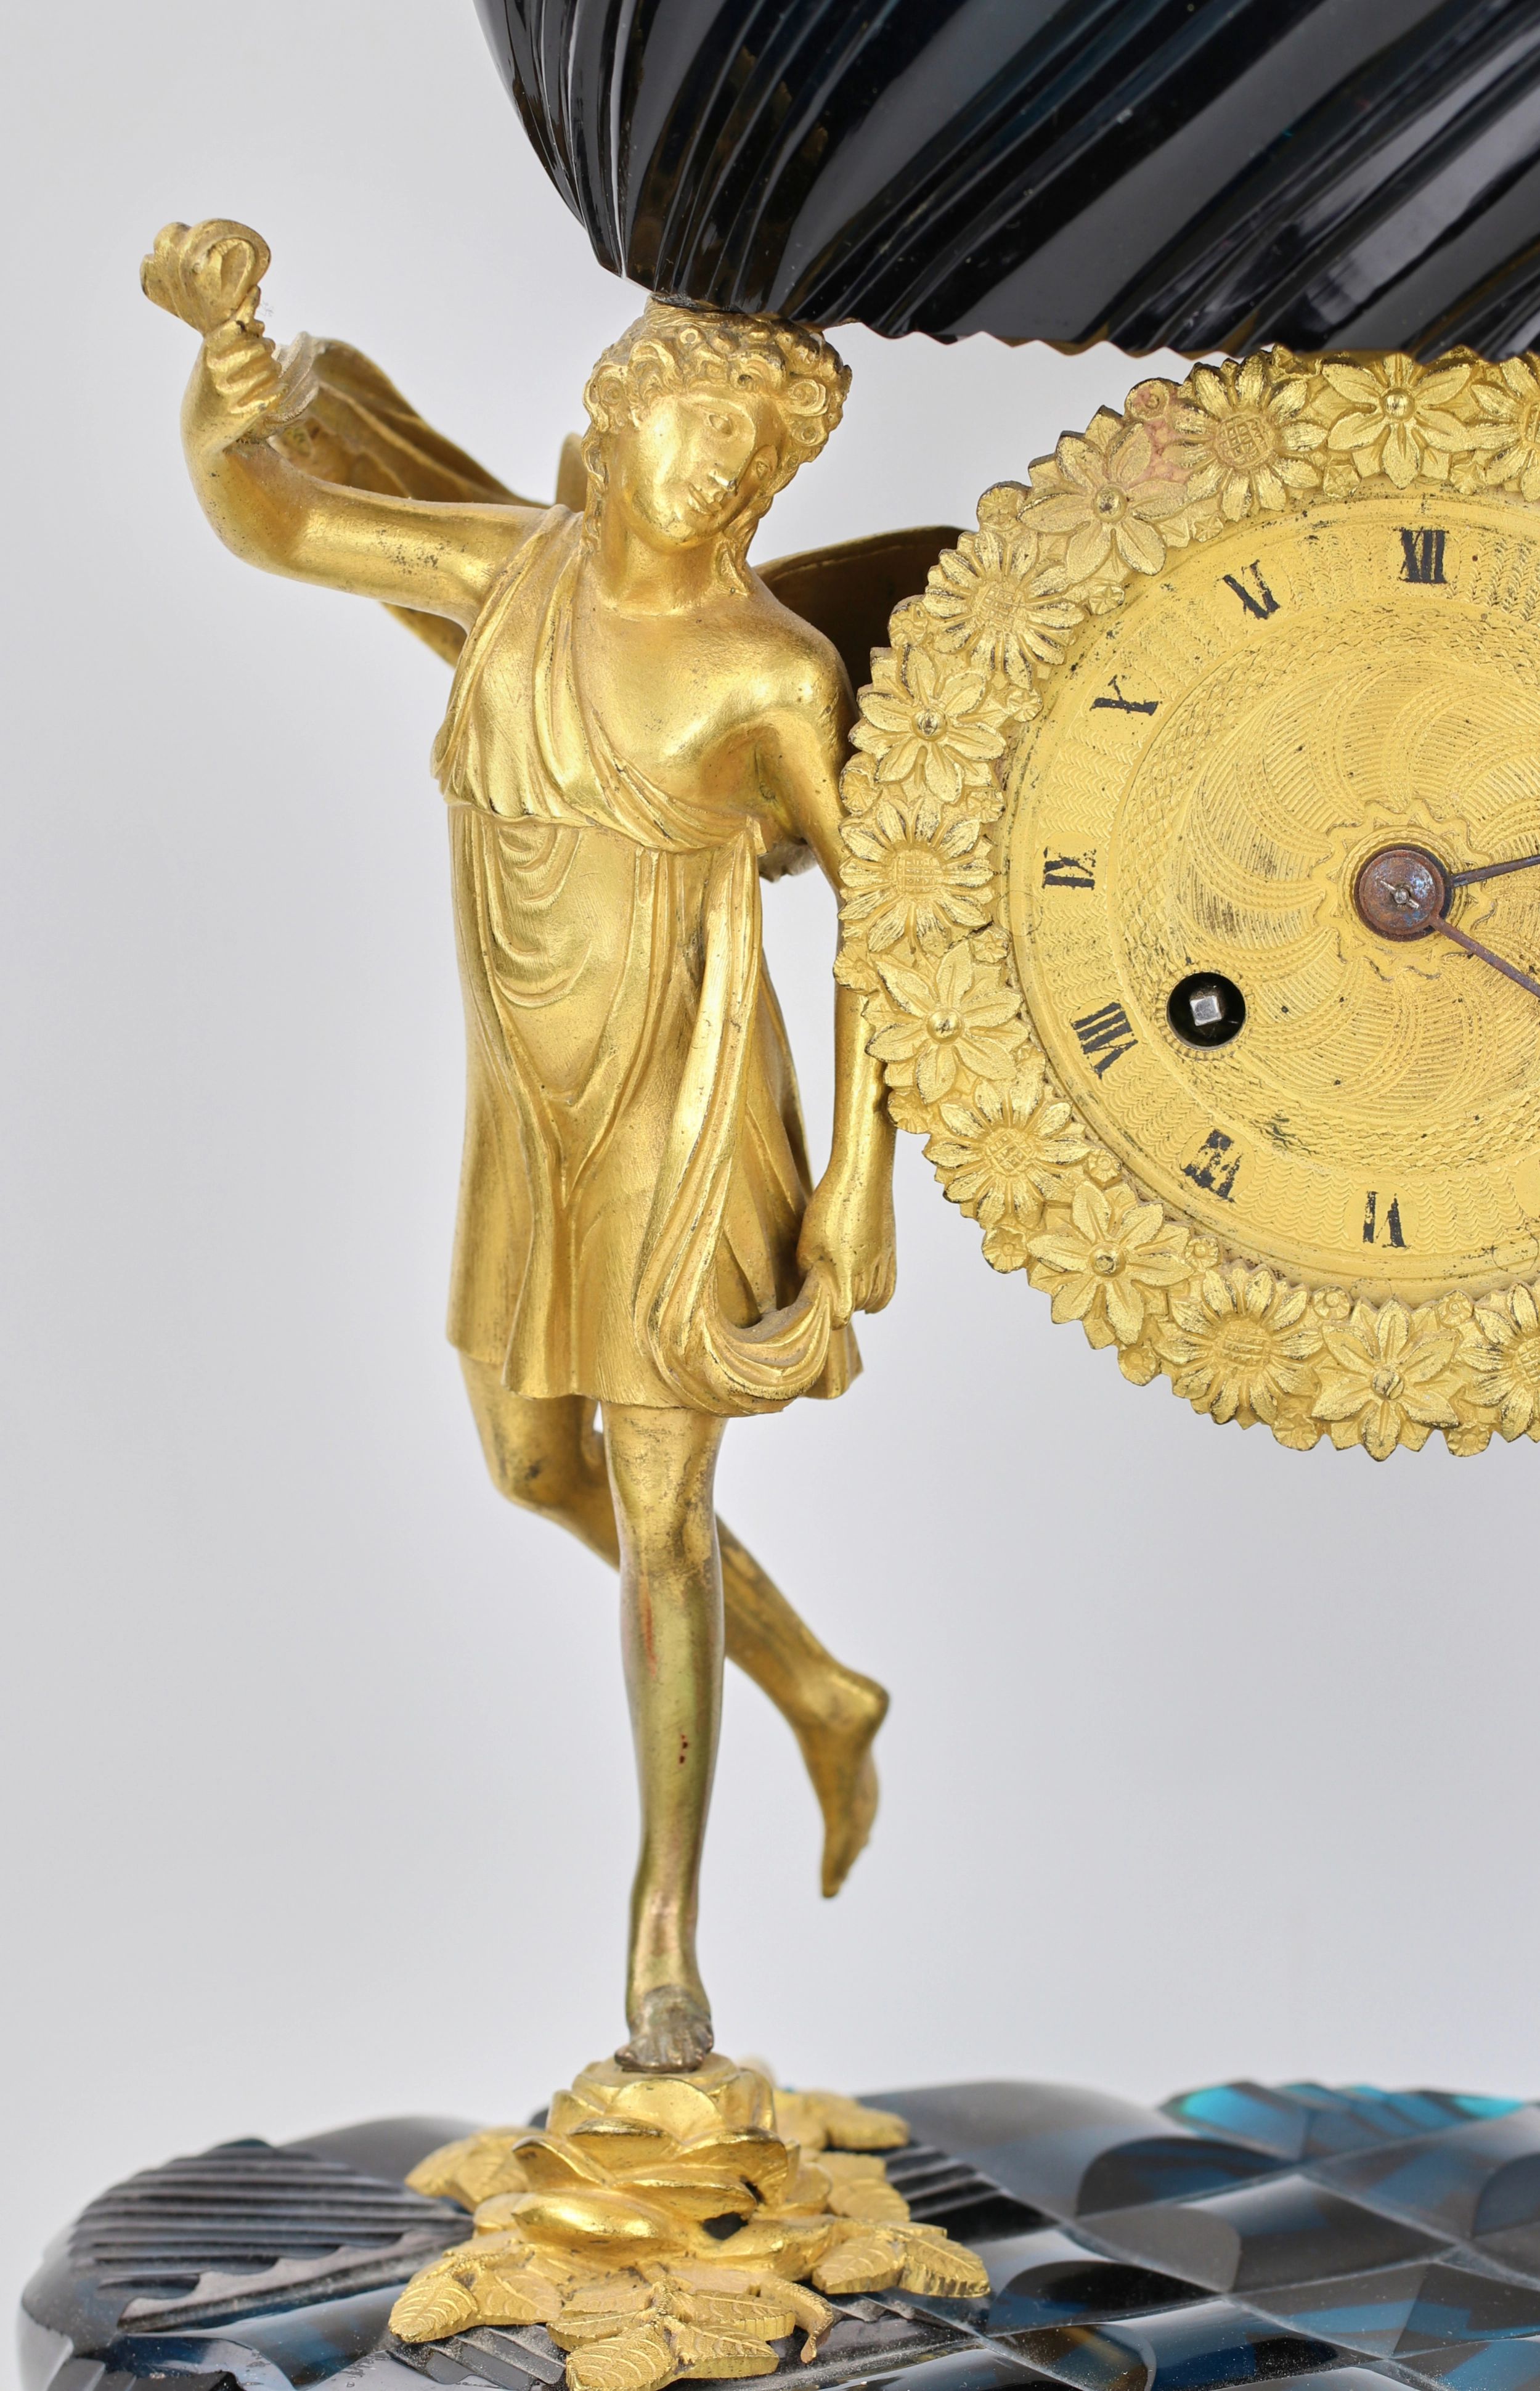 Unique mantel clock, made of glass and bronze. Royal Russia. Early 19th century. - Image 5 of 5